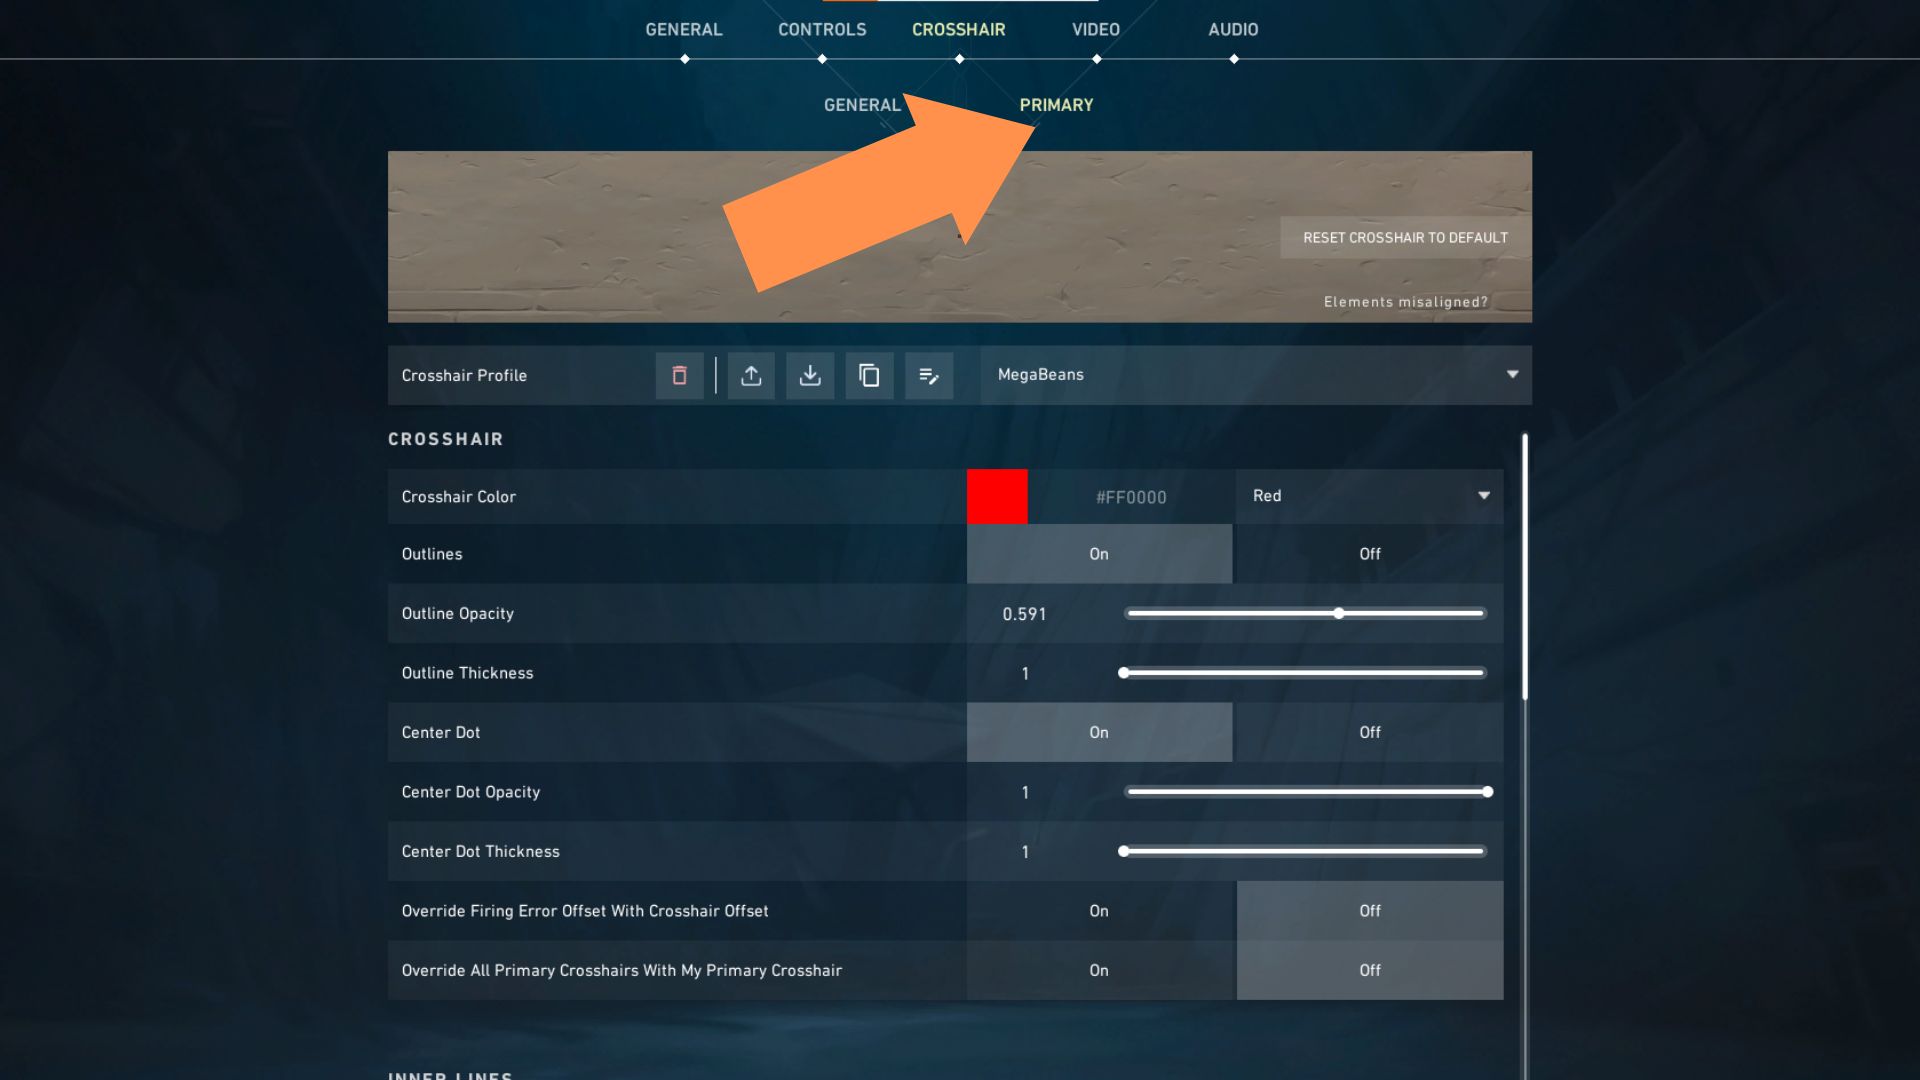 A screenshot showing the Primary tab for the crosshair settings in Valorant